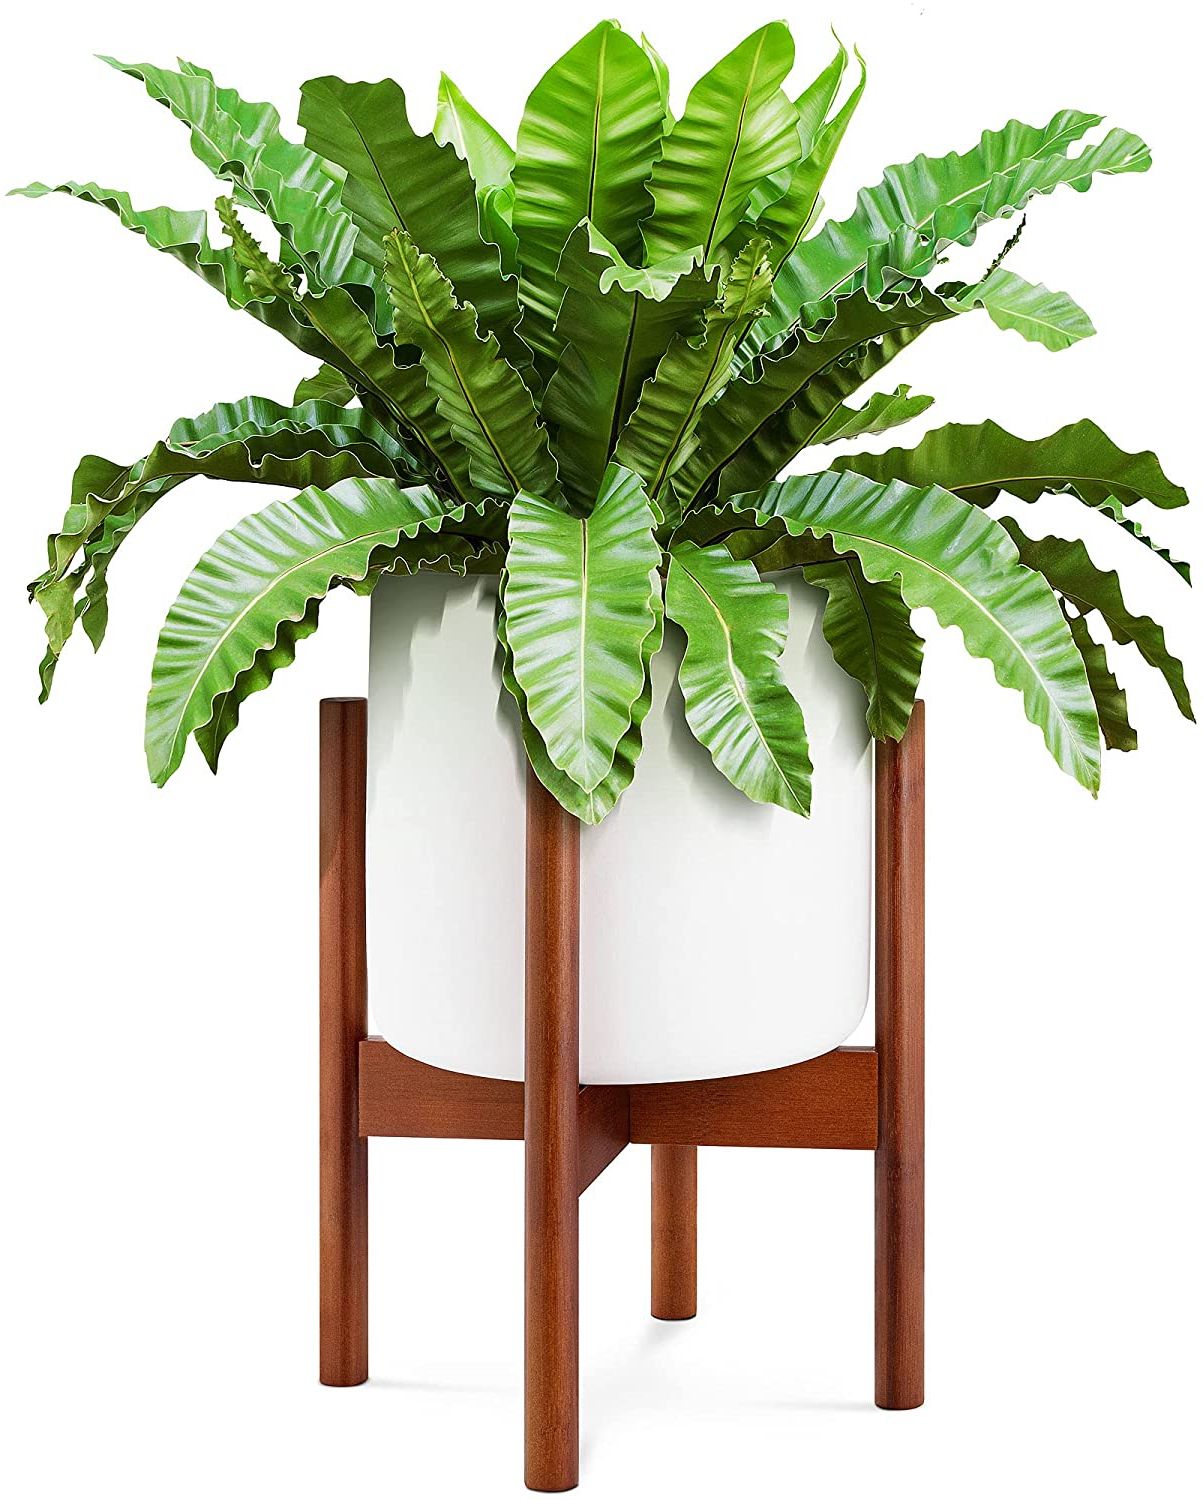 10 Inch Plant Stands Regarding Most Recent 14" Mid Century Modern Large Planter With Stand, Elevated Plant Stand With  Pot Included, 10 Inch White Plant Pot, 14 Inch Tall Bamboo Plant Holder For  Indoor Snake Plants Flowers, Wood & (View 4 of 15)